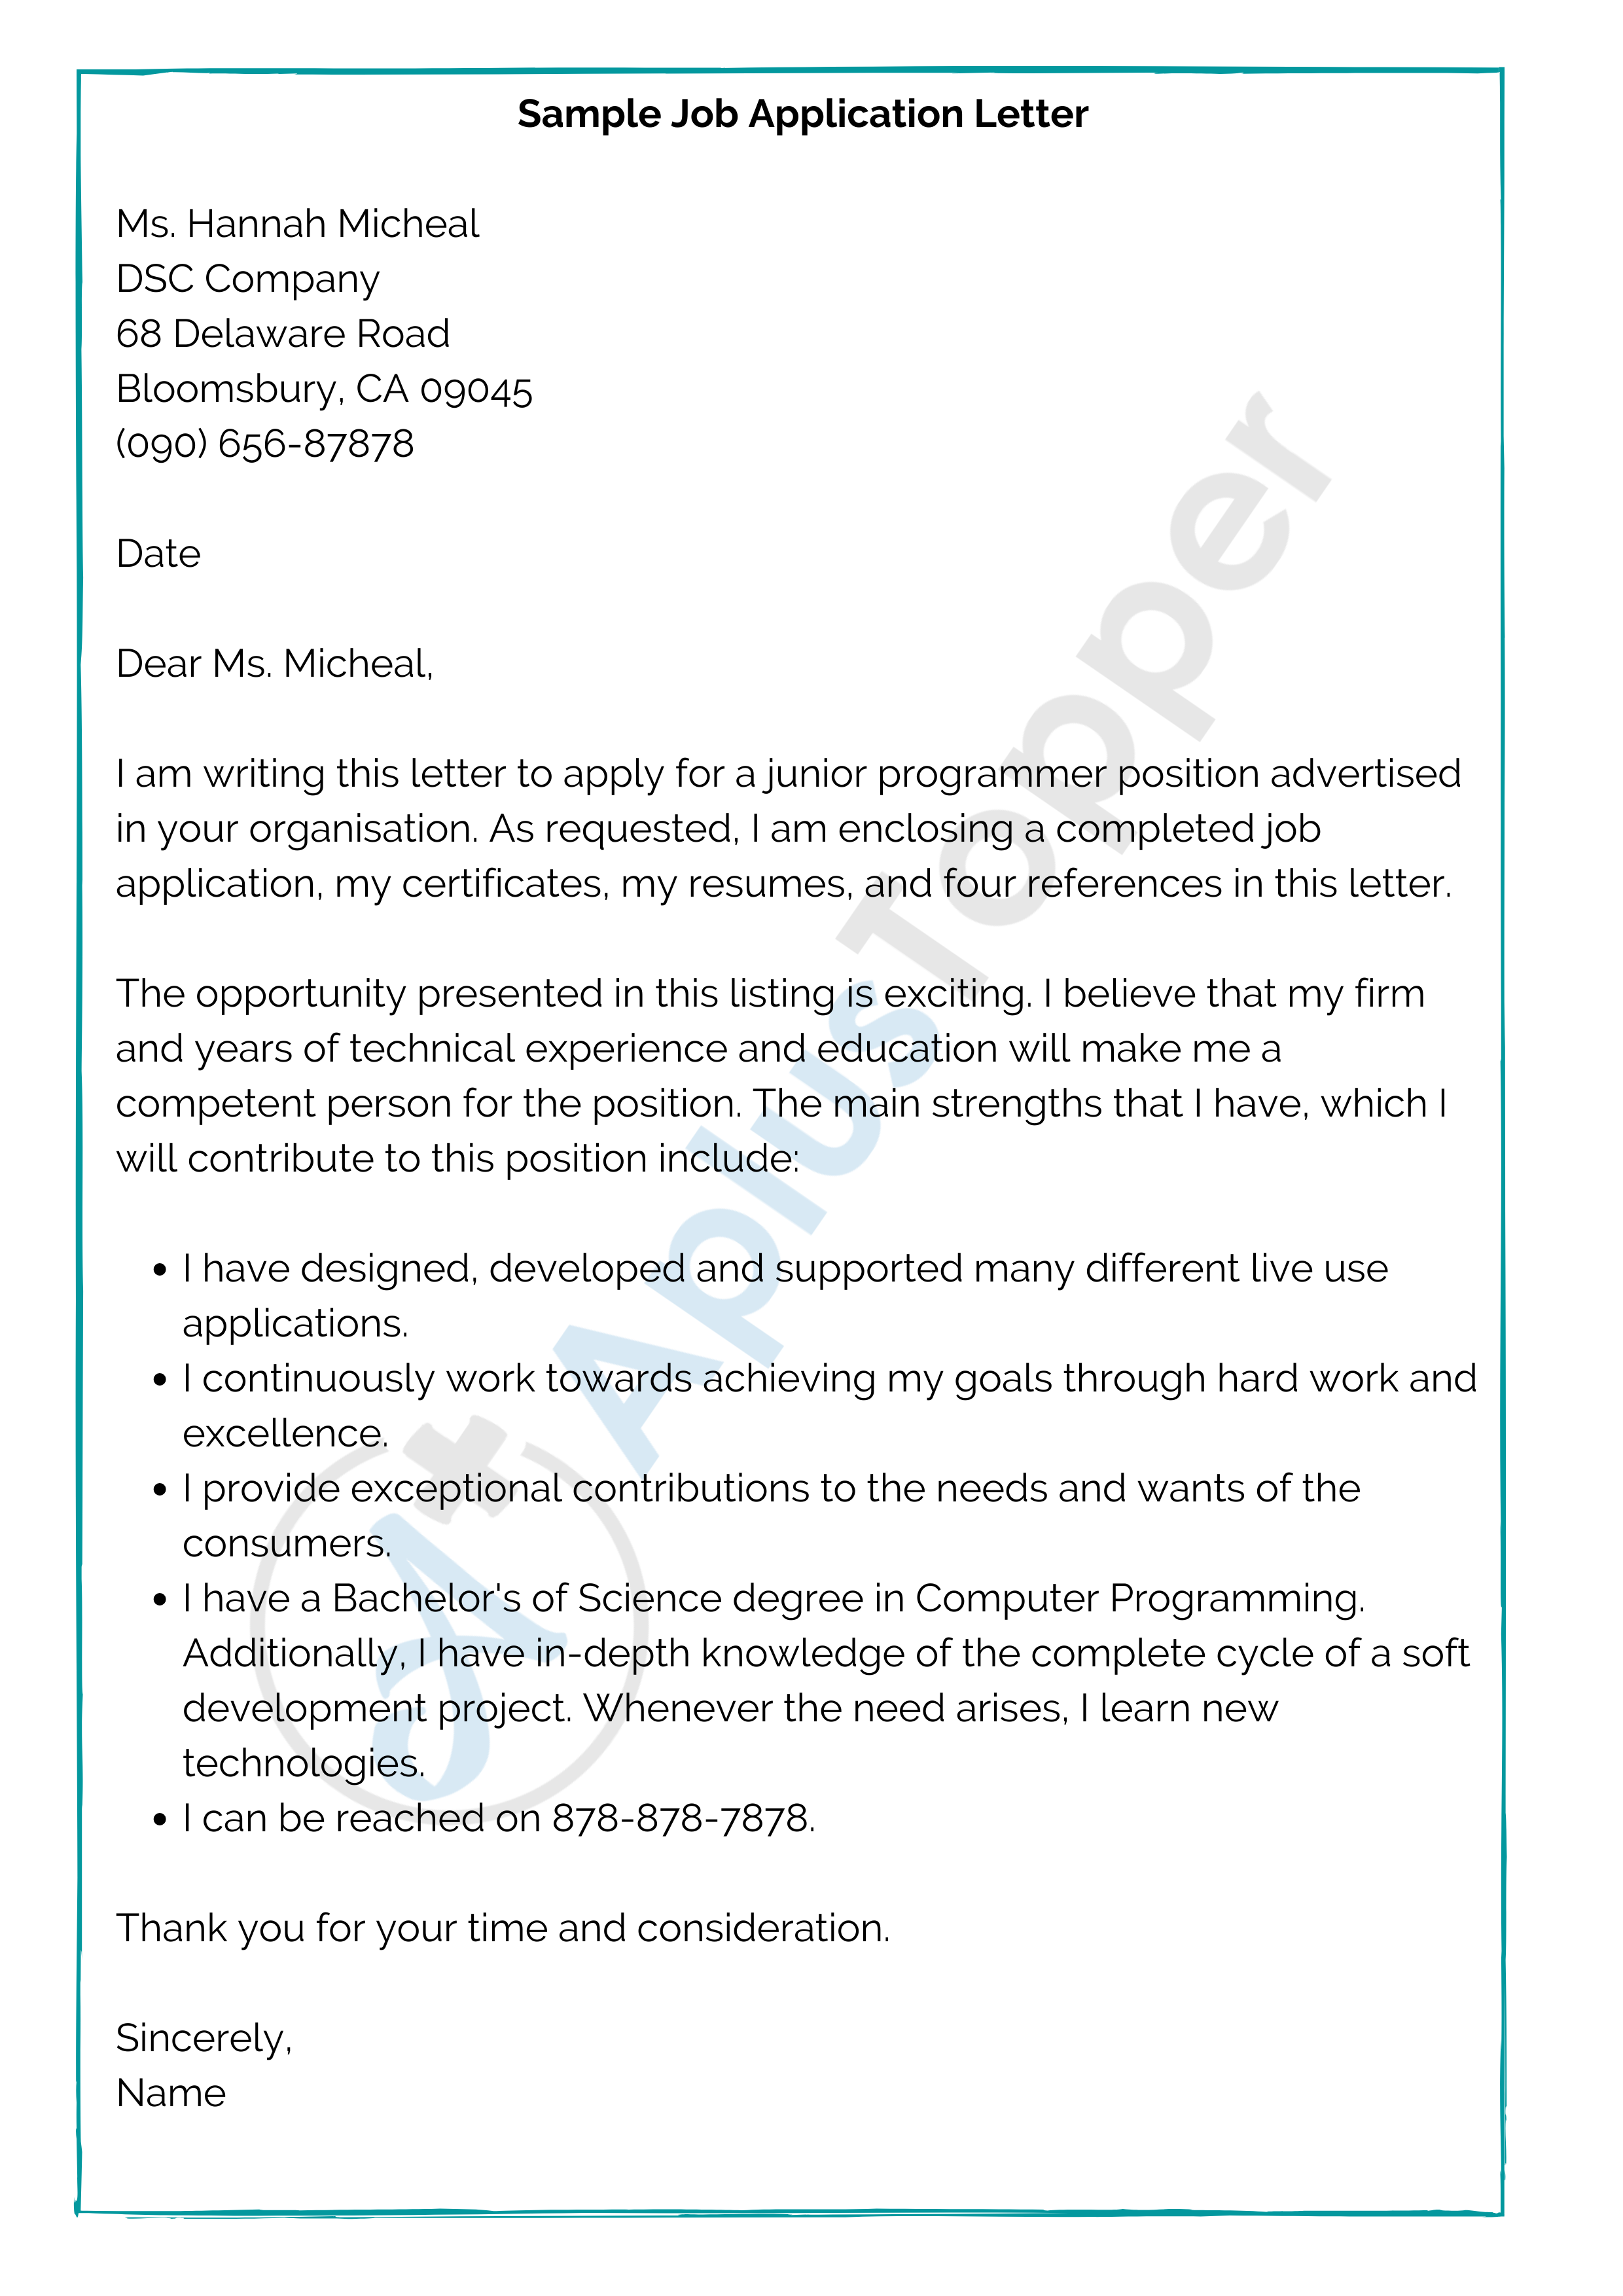 example of employment application letter writing